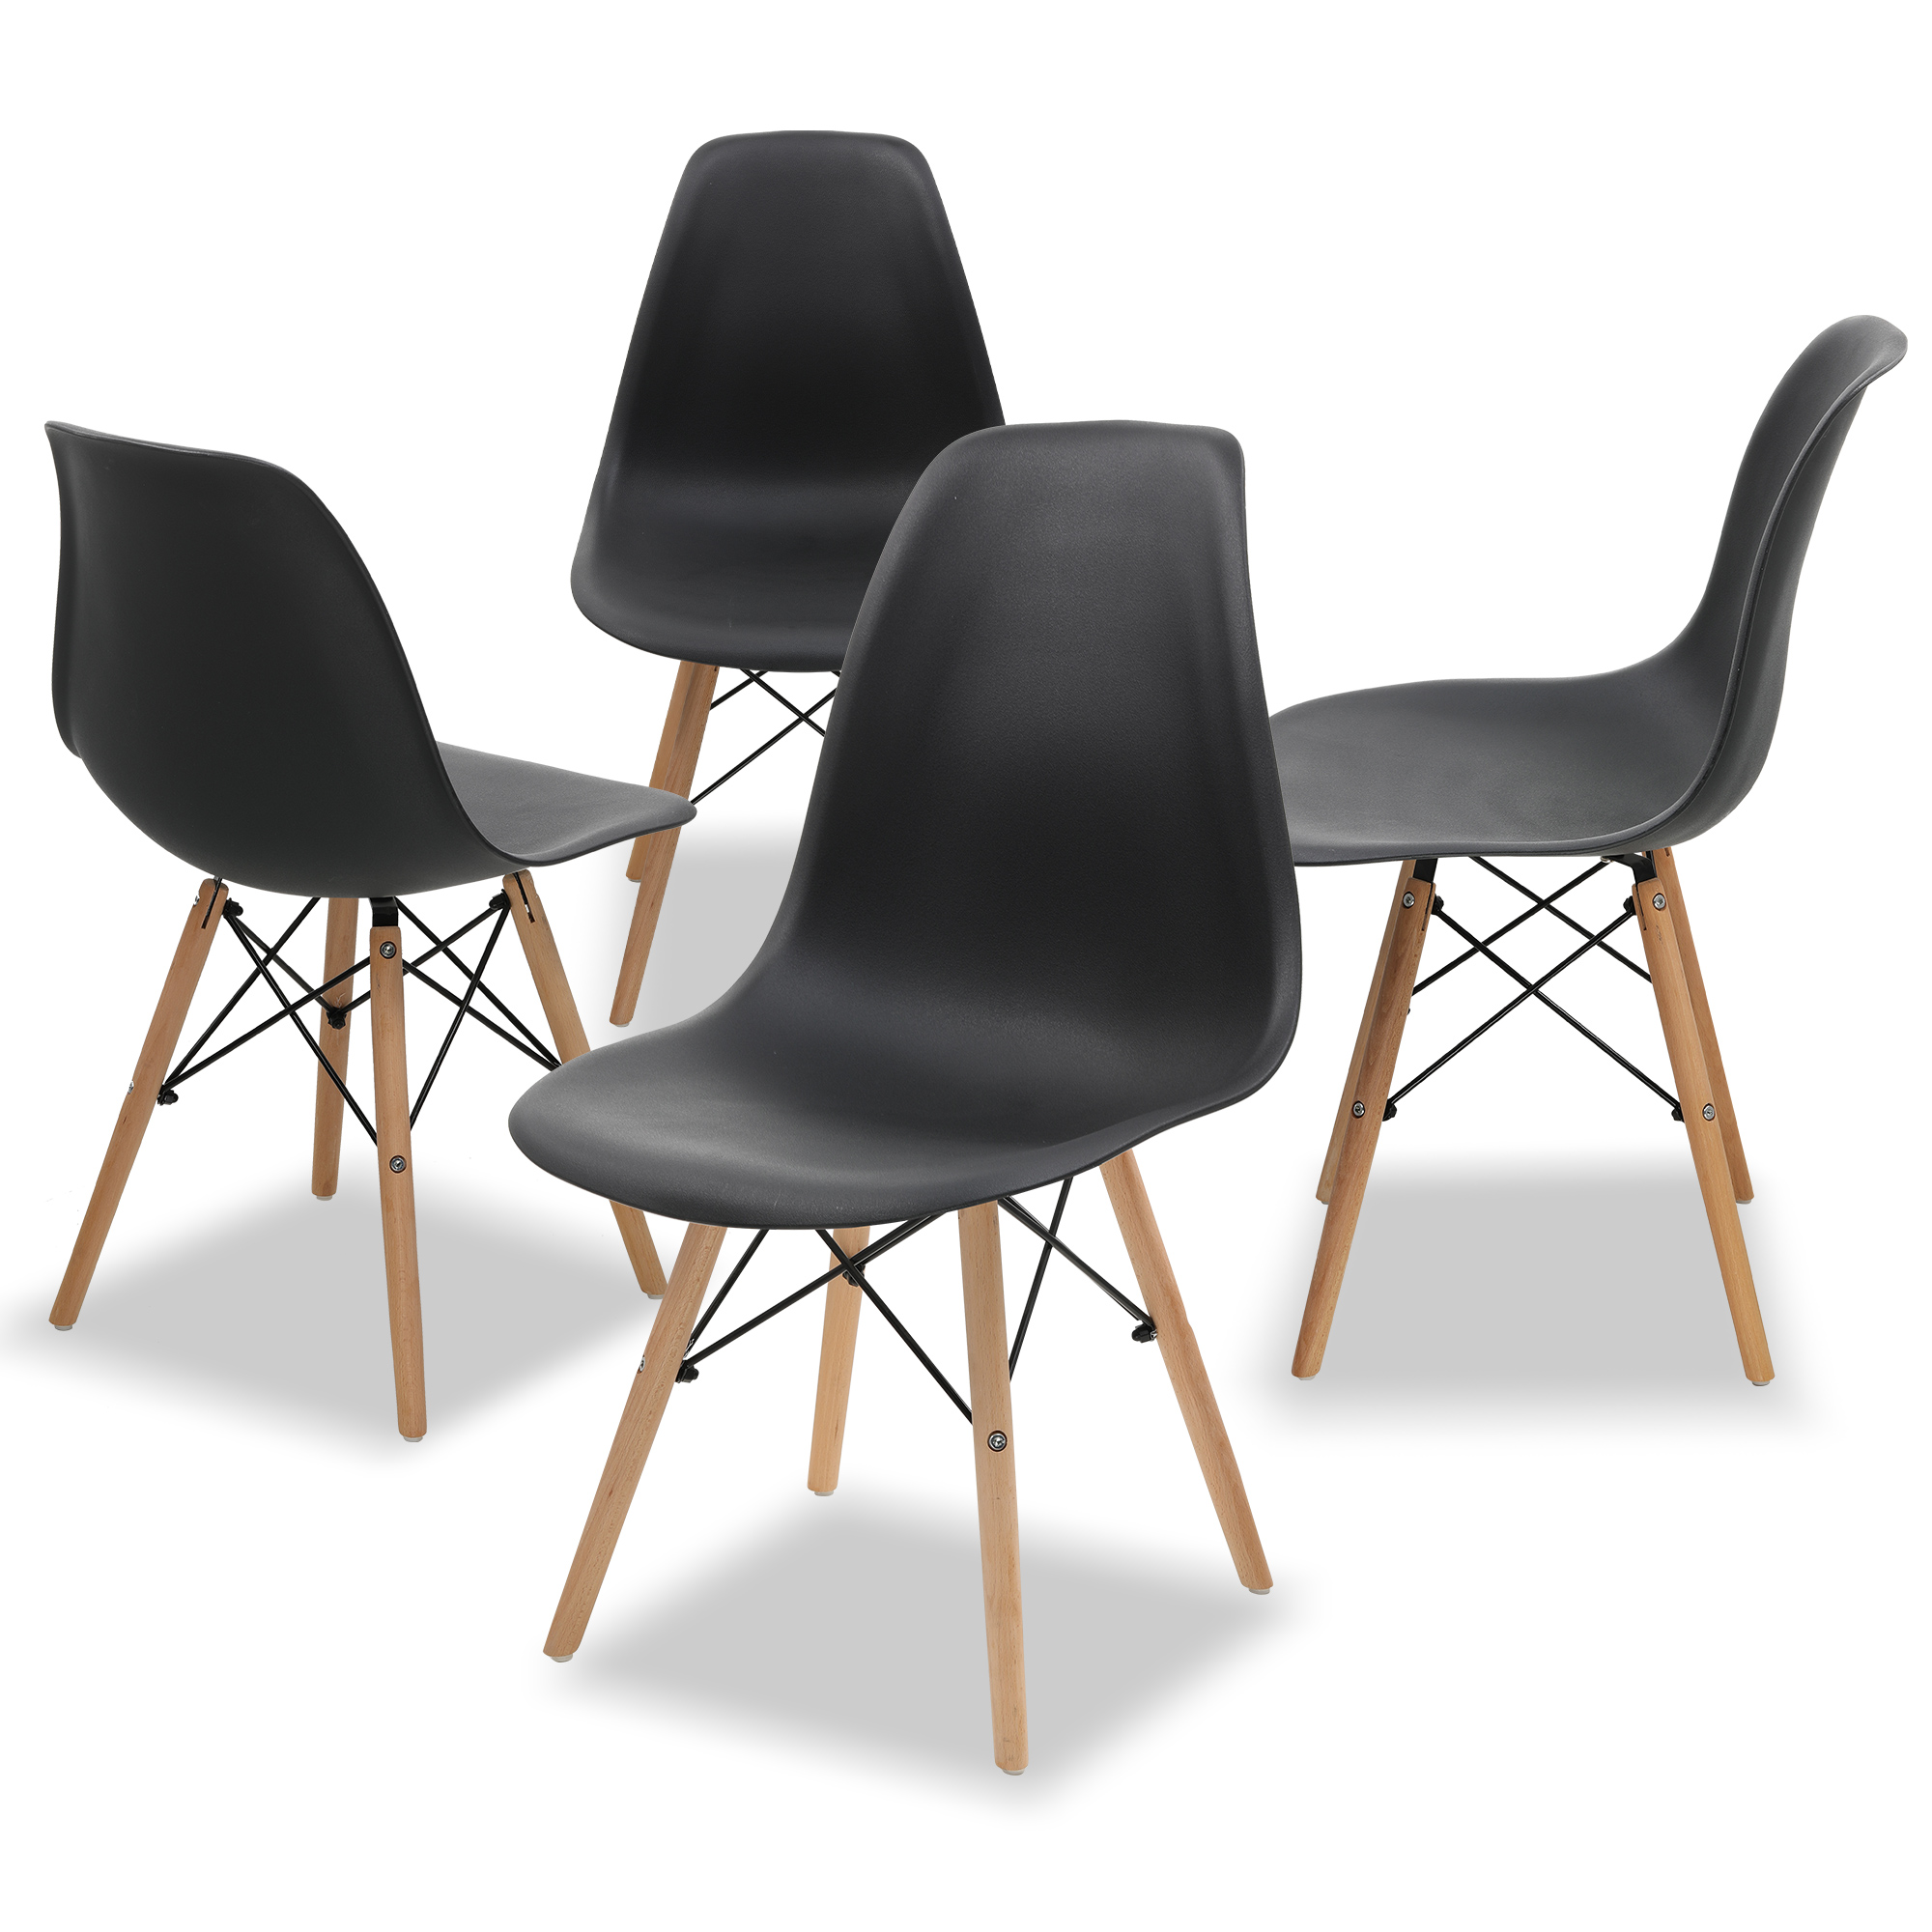 COMHOMA Dining Chair PVC Plastic Lounge Chair Kitchen Dining Room Chair, Black Set of 4 - image 1 of 6